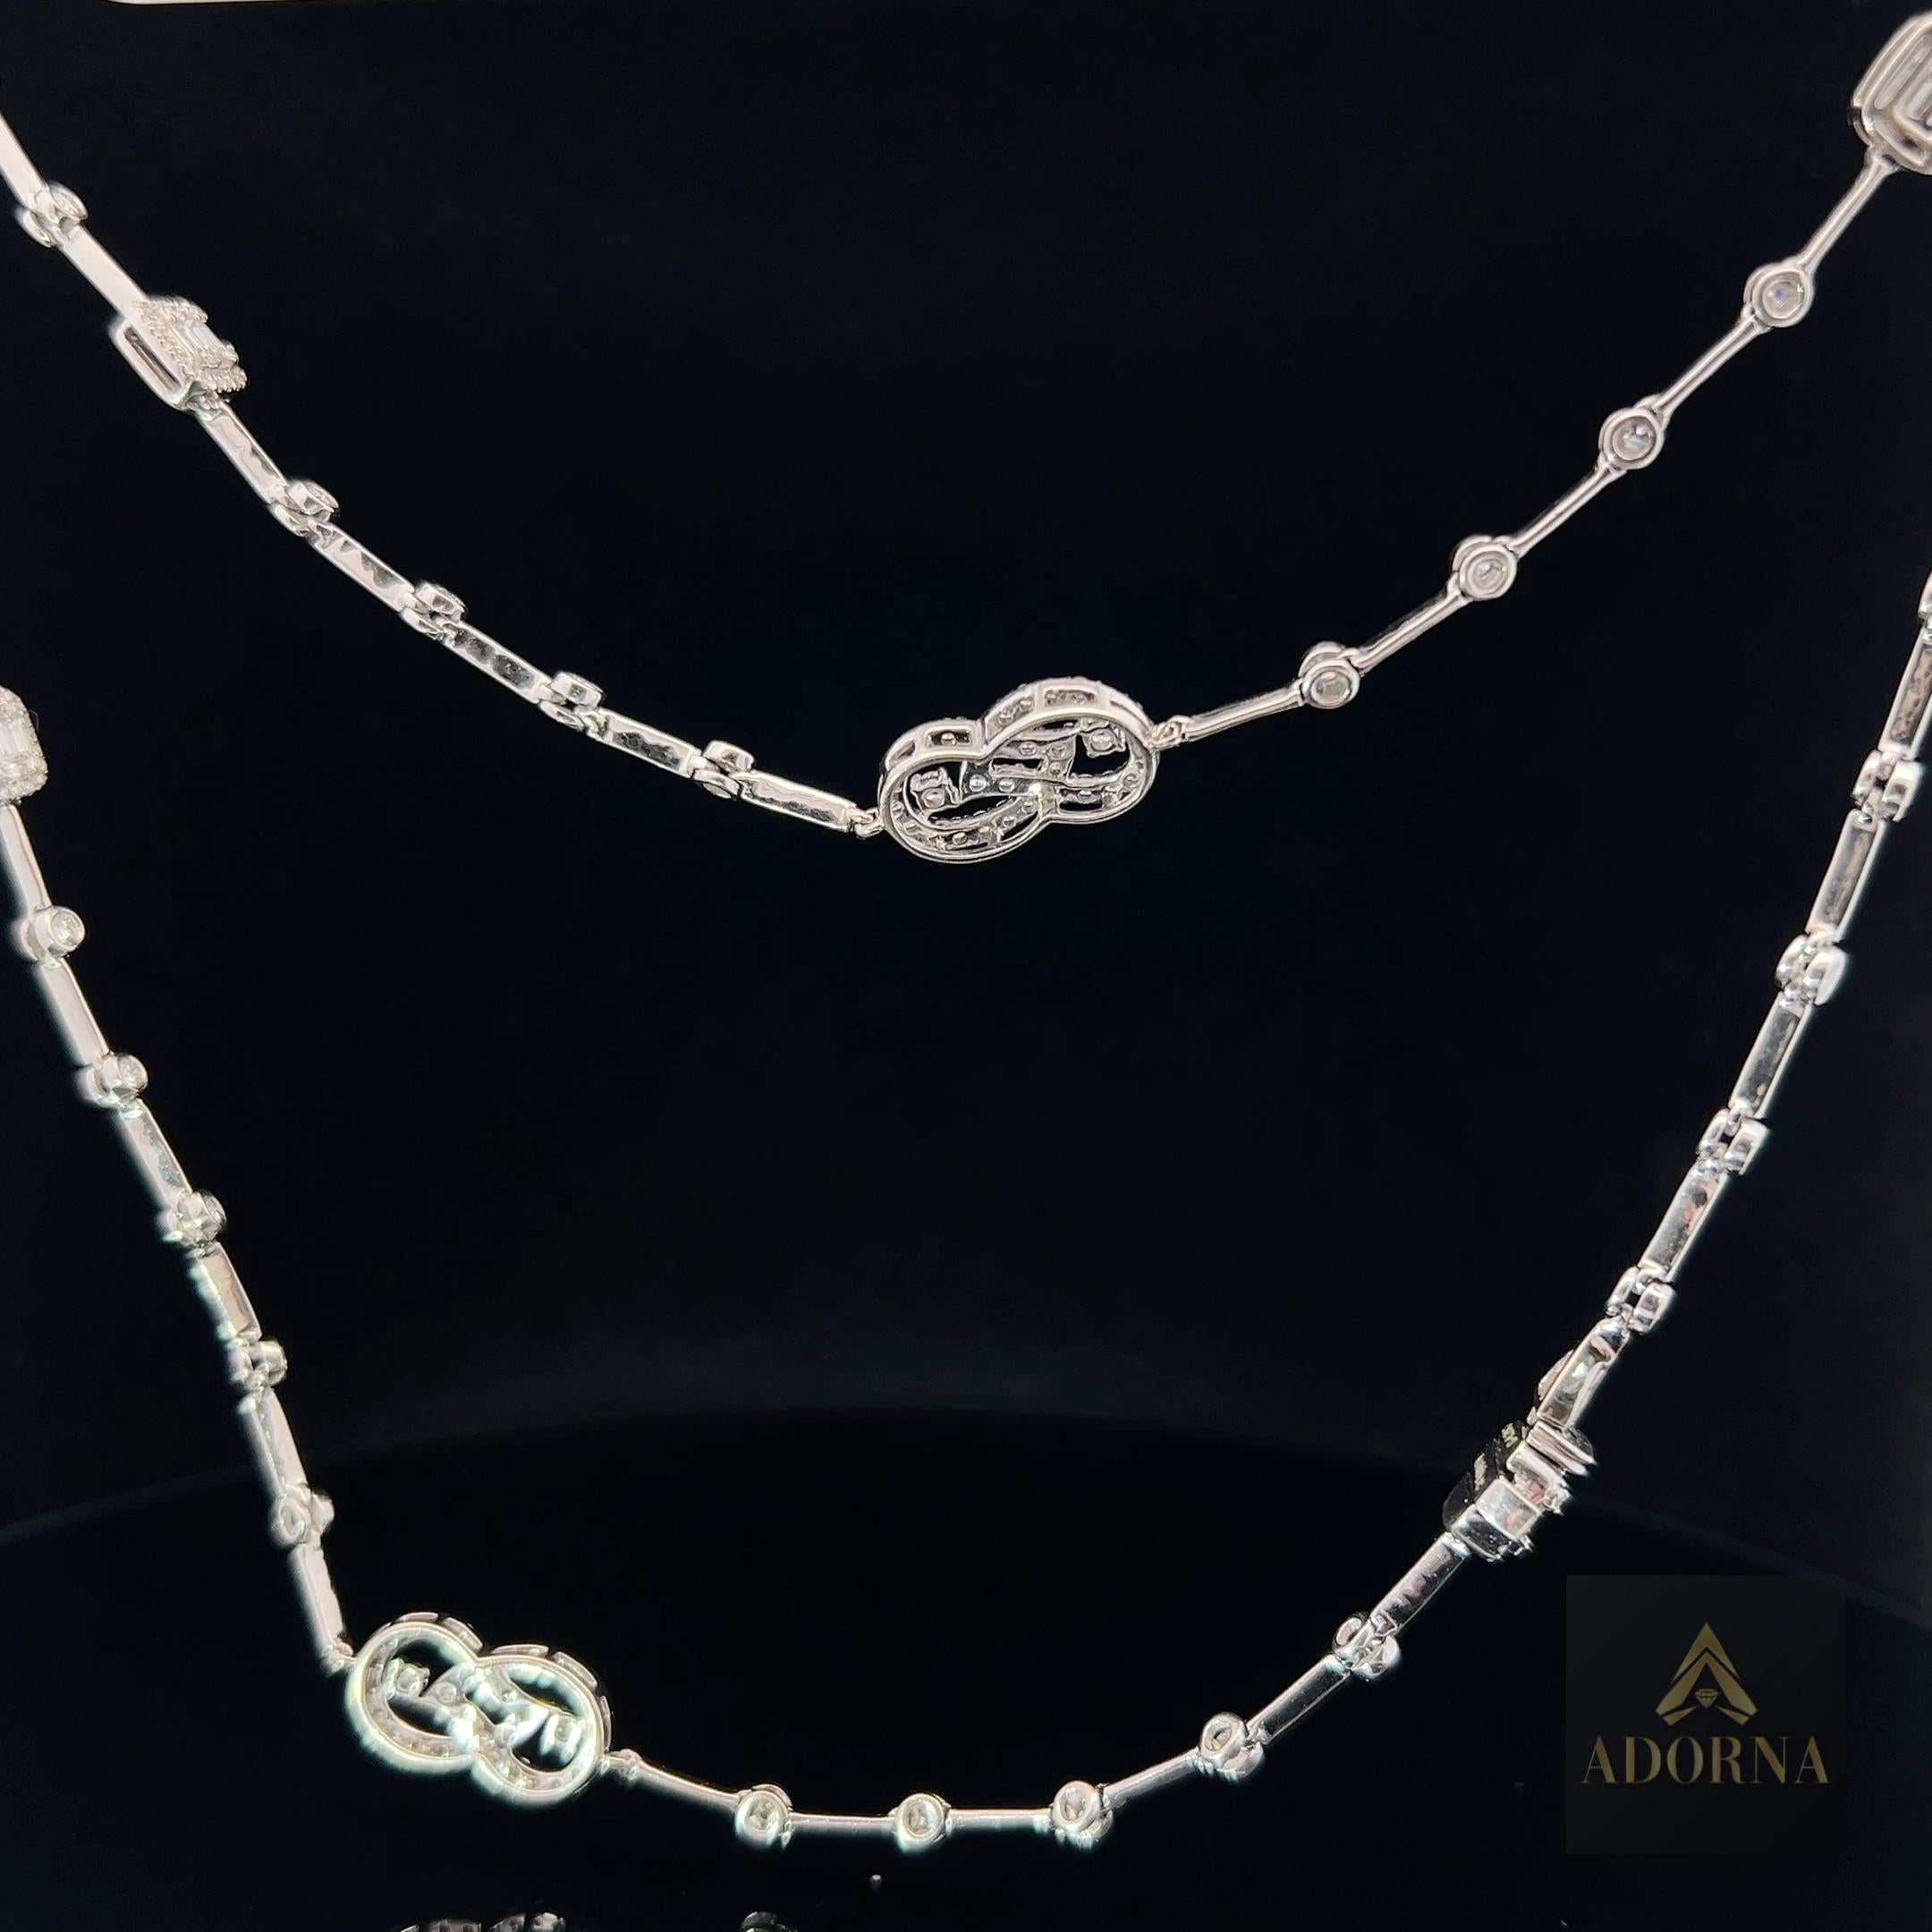 Necklace Information
Diamond Type : Natural Diamond
Metal : 14K
Metal Color : White Gold
Diamond Carat Weight : 6.25ttcw


JEWELRY CARE
Over the course of time, body oil and skin products can collect on Jewelry and leave a residue which can occlude